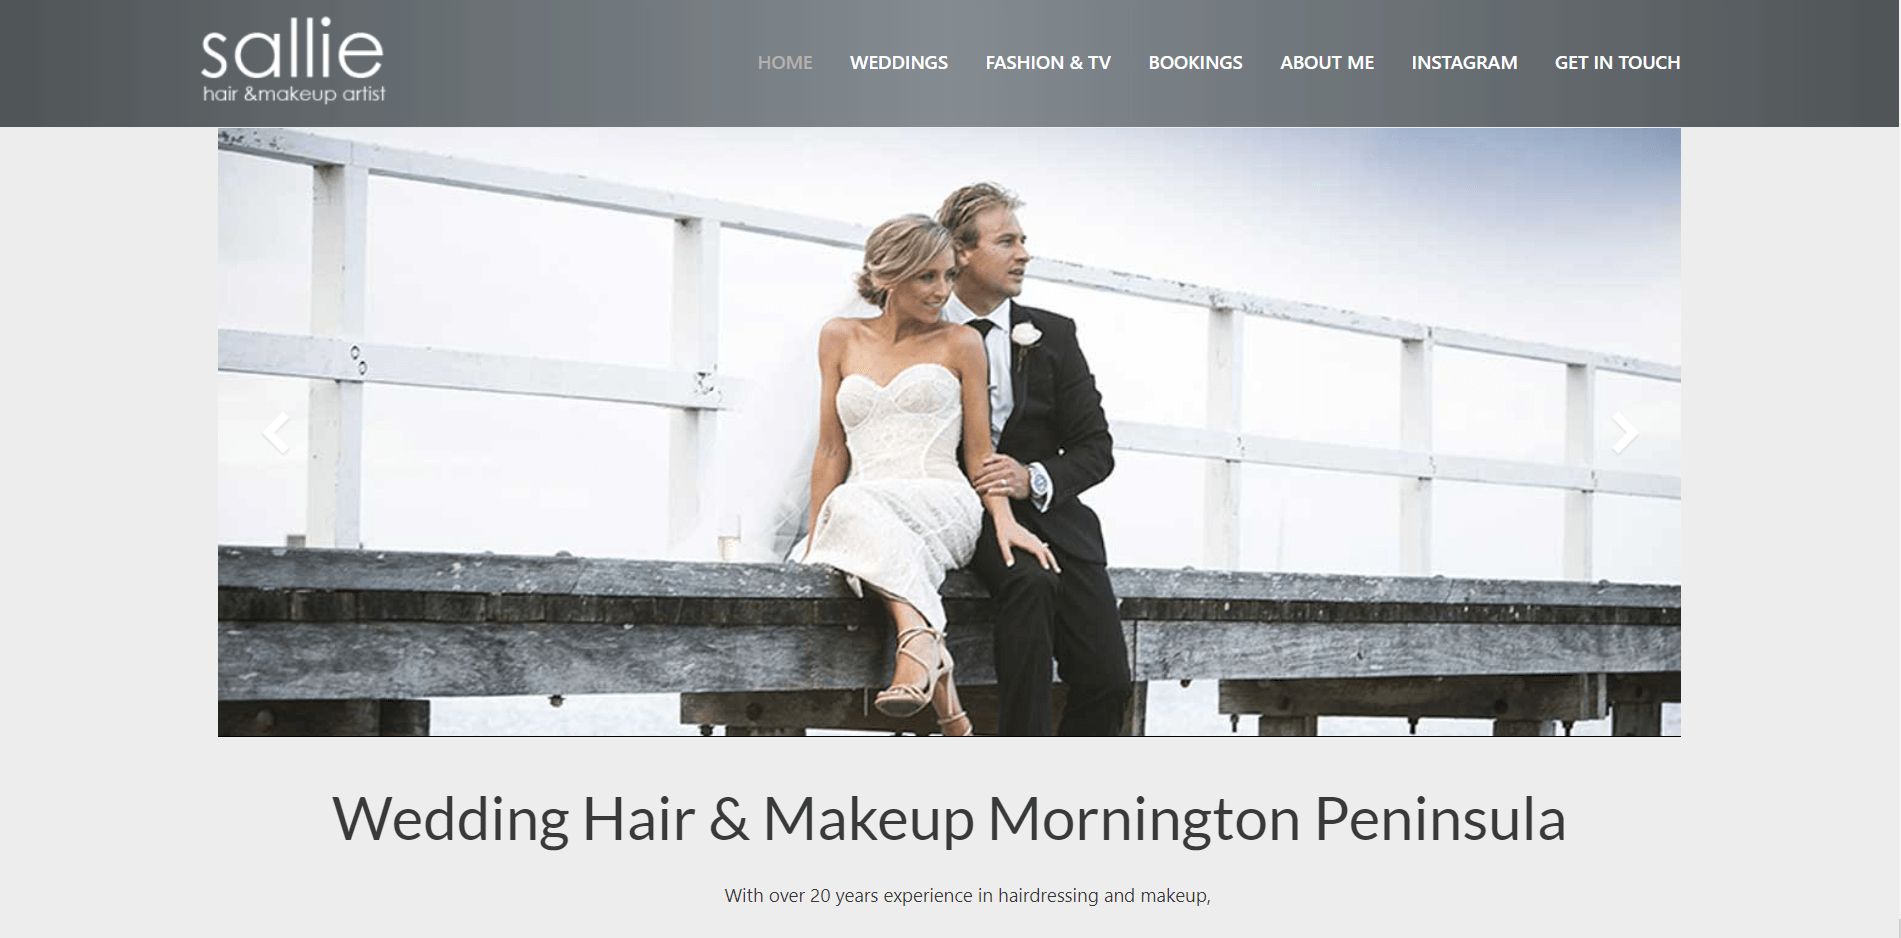 Top 50 Wedding Hair and Makeup Artists in Melbourne, Victoria [2021]  by Wild Romantic Photography Melbourne